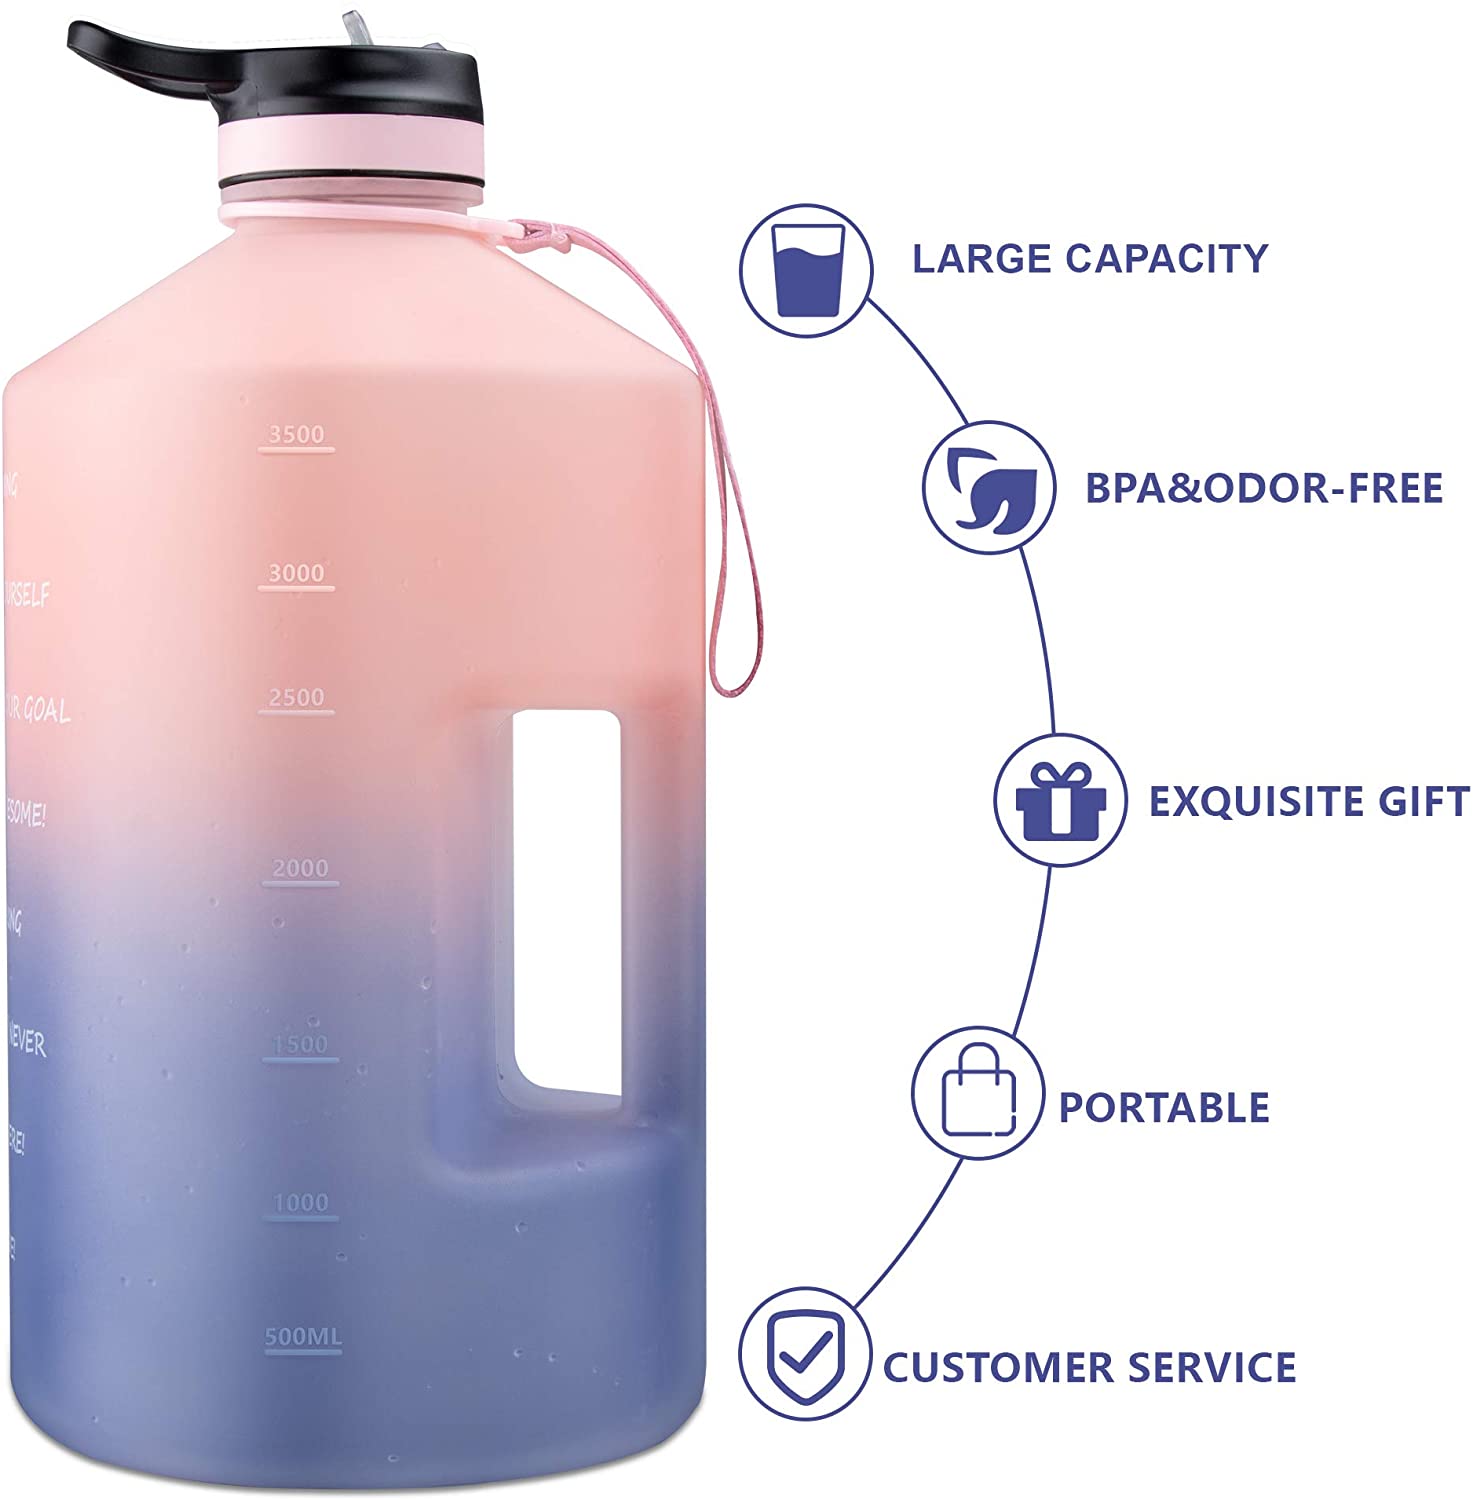 SOXCOXO 1 Gallon Water Bottle with Straw,Large Gallon Water Jug